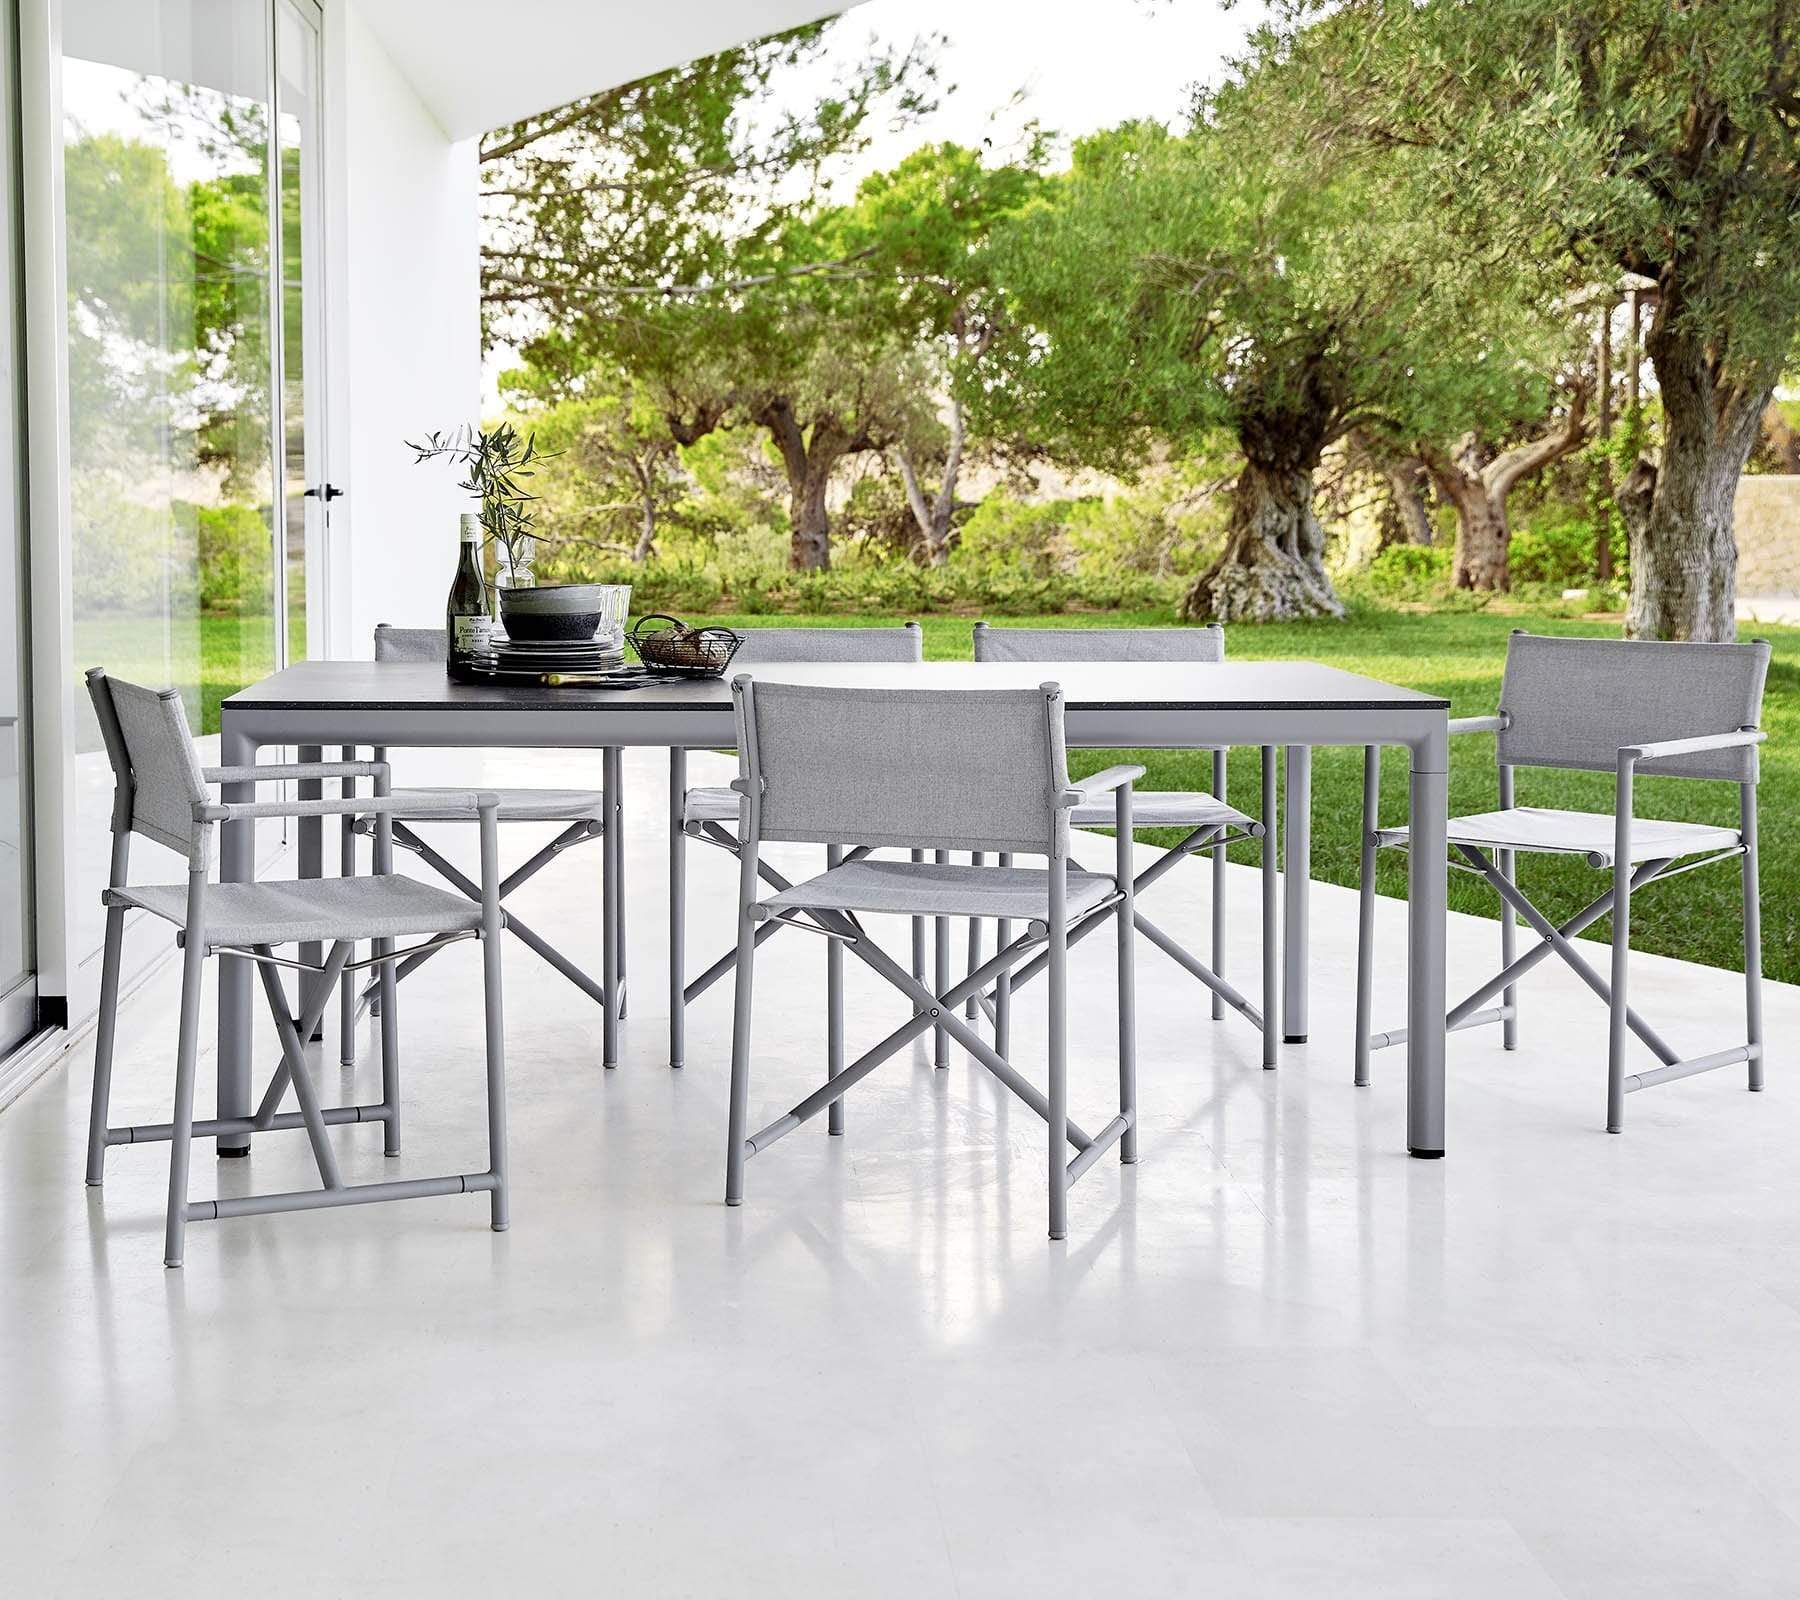 Boxhill's Drop Outdoor Dining Table Light Grey lifestyle image with dining chairs beside glass wall at patio